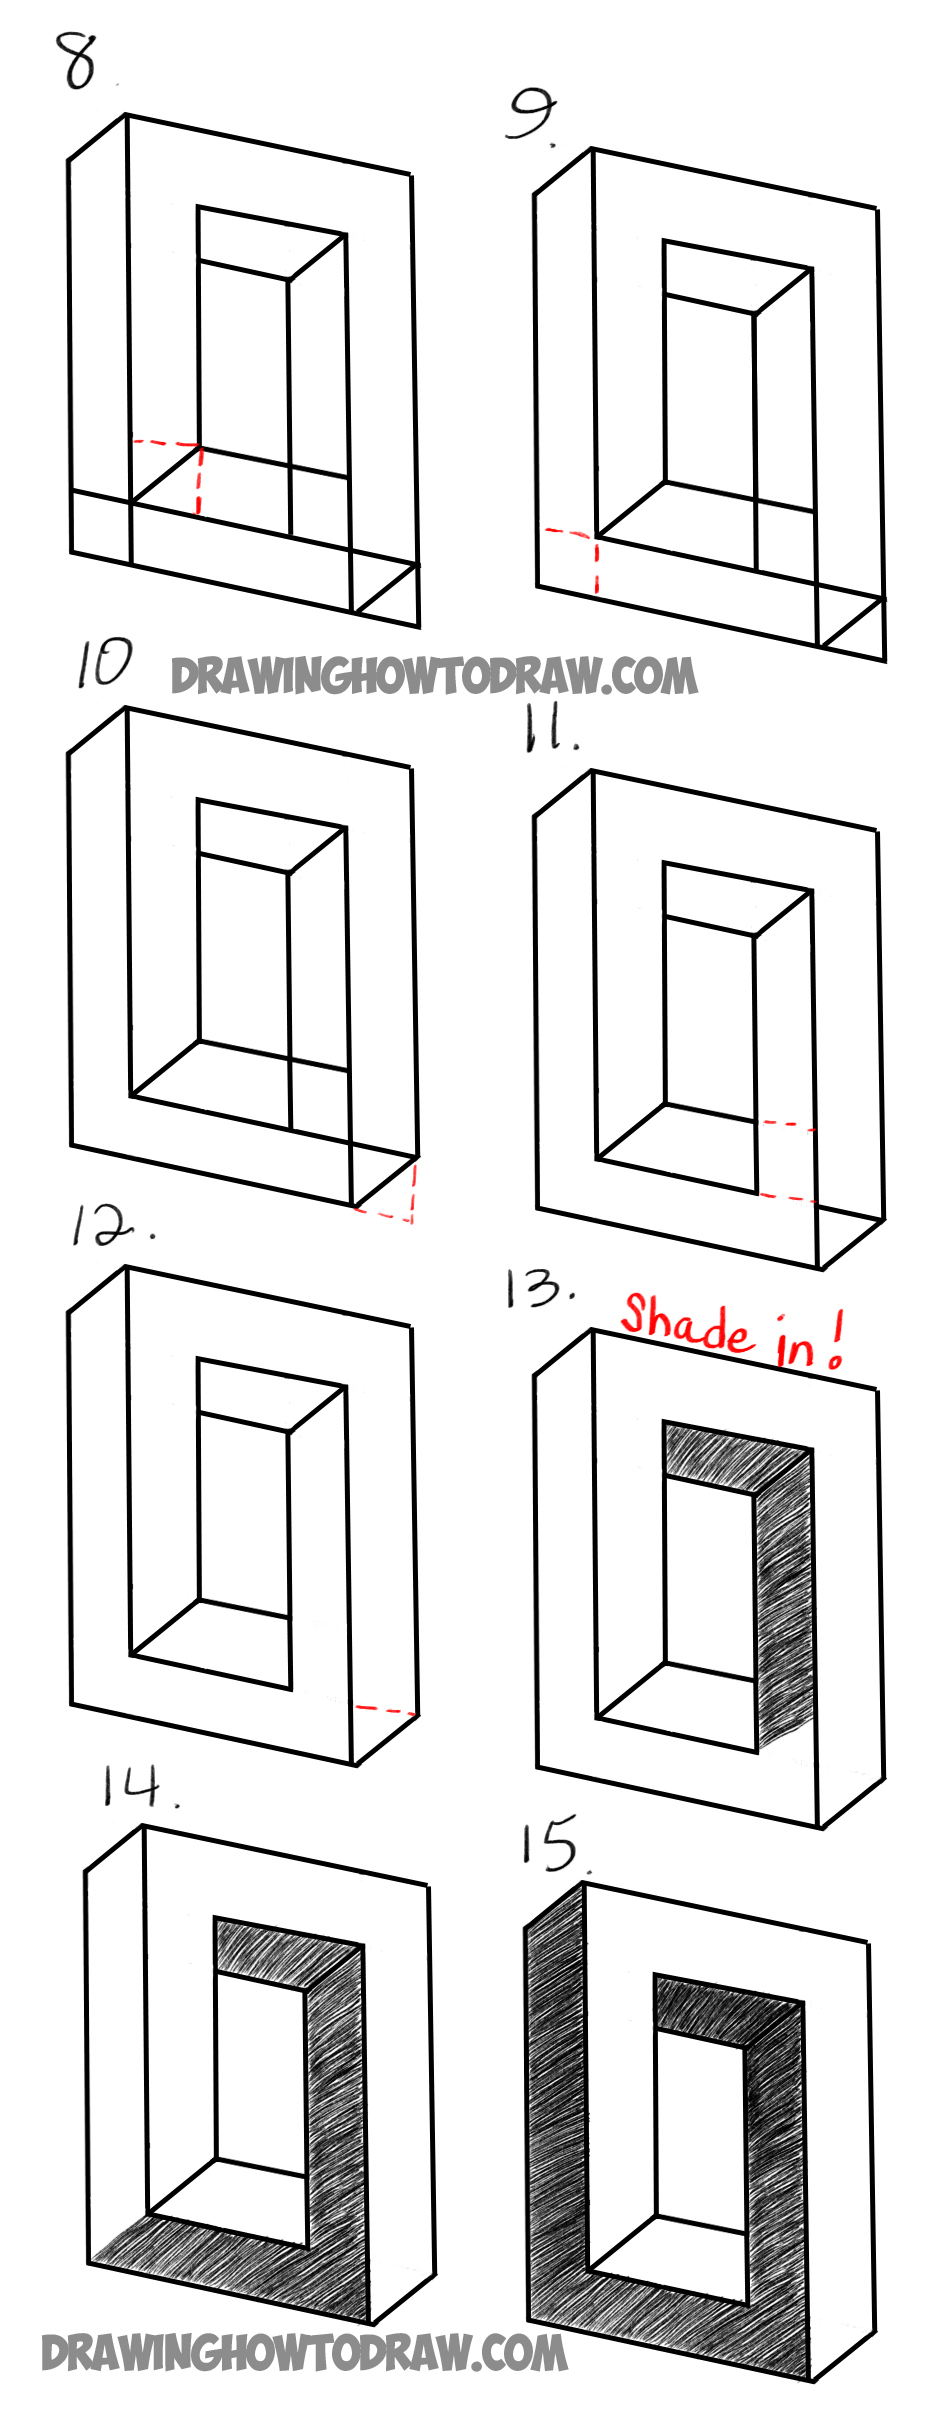 How to Draw a Simple Optical Illusion: The Impossible Oval